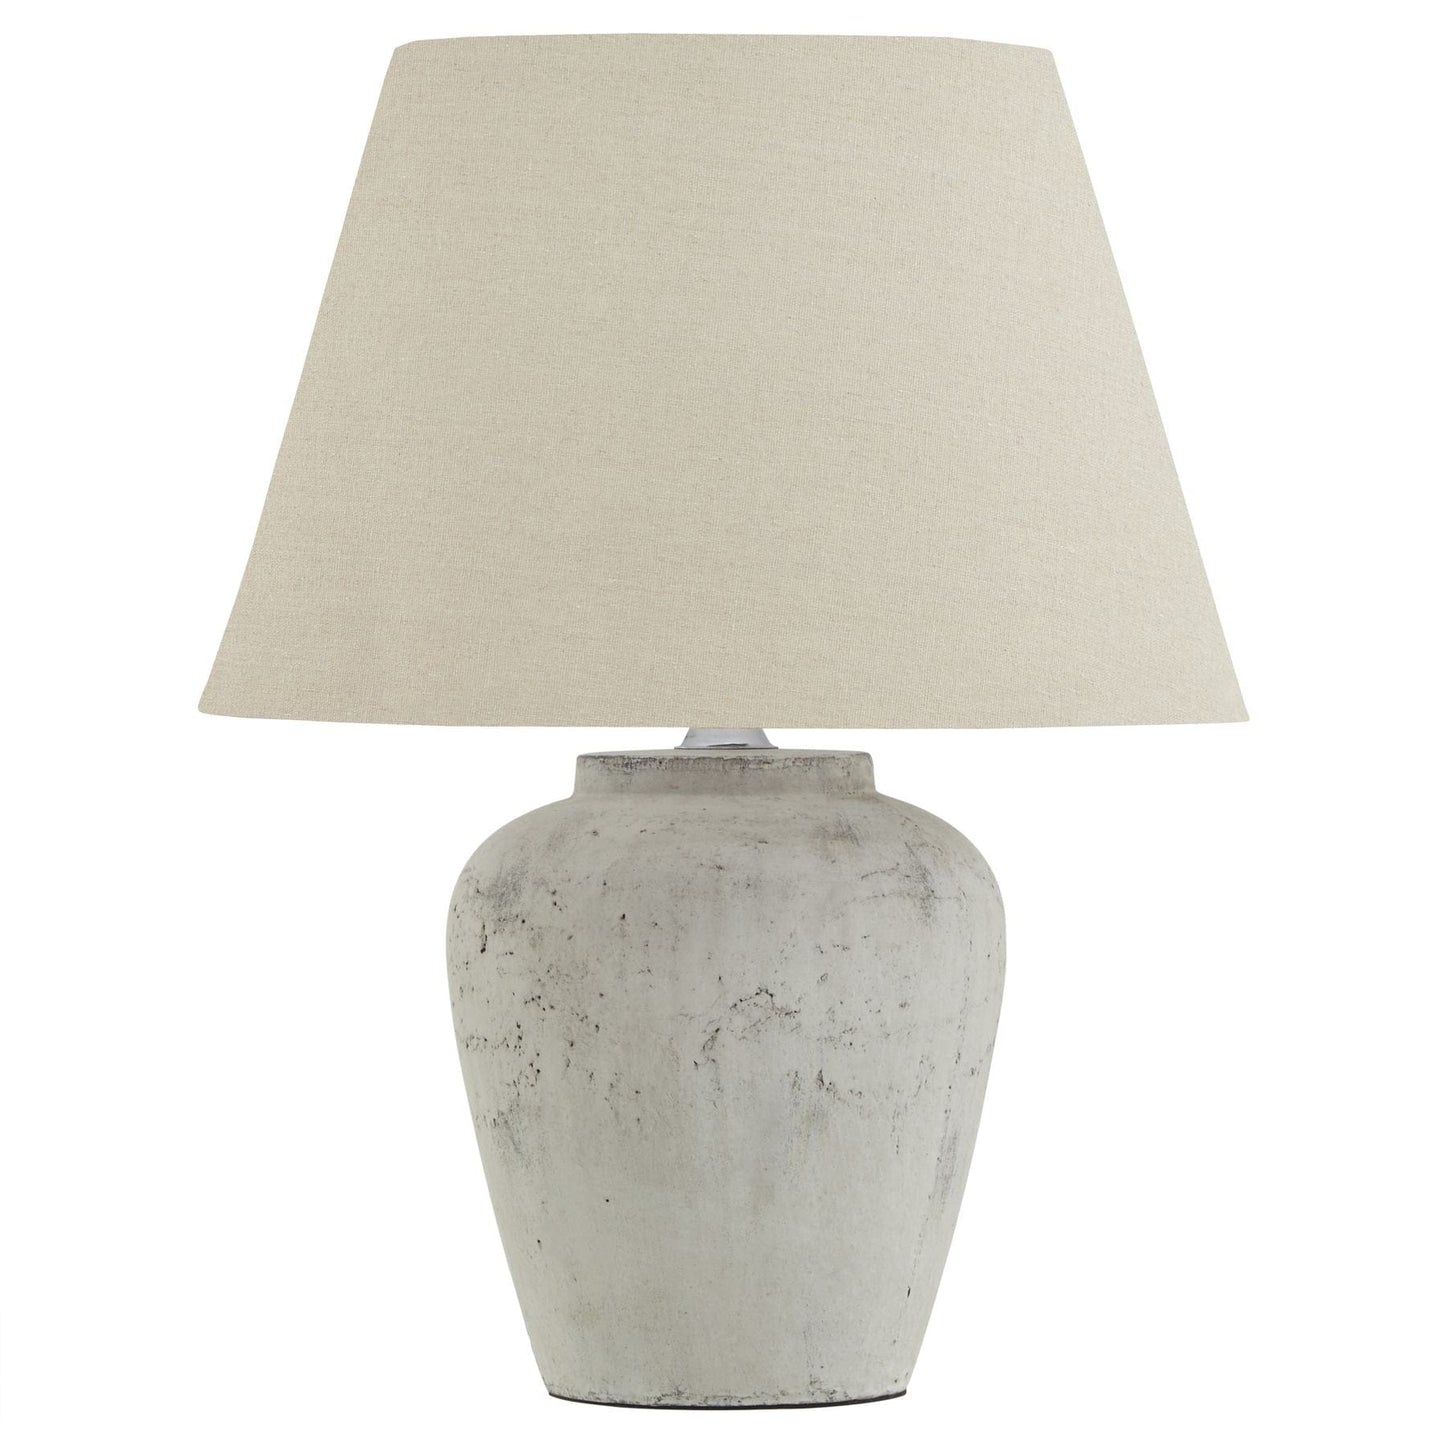 Hill Interiors Table Lamp Darcy Antique White Table Lamp With Linen Shade